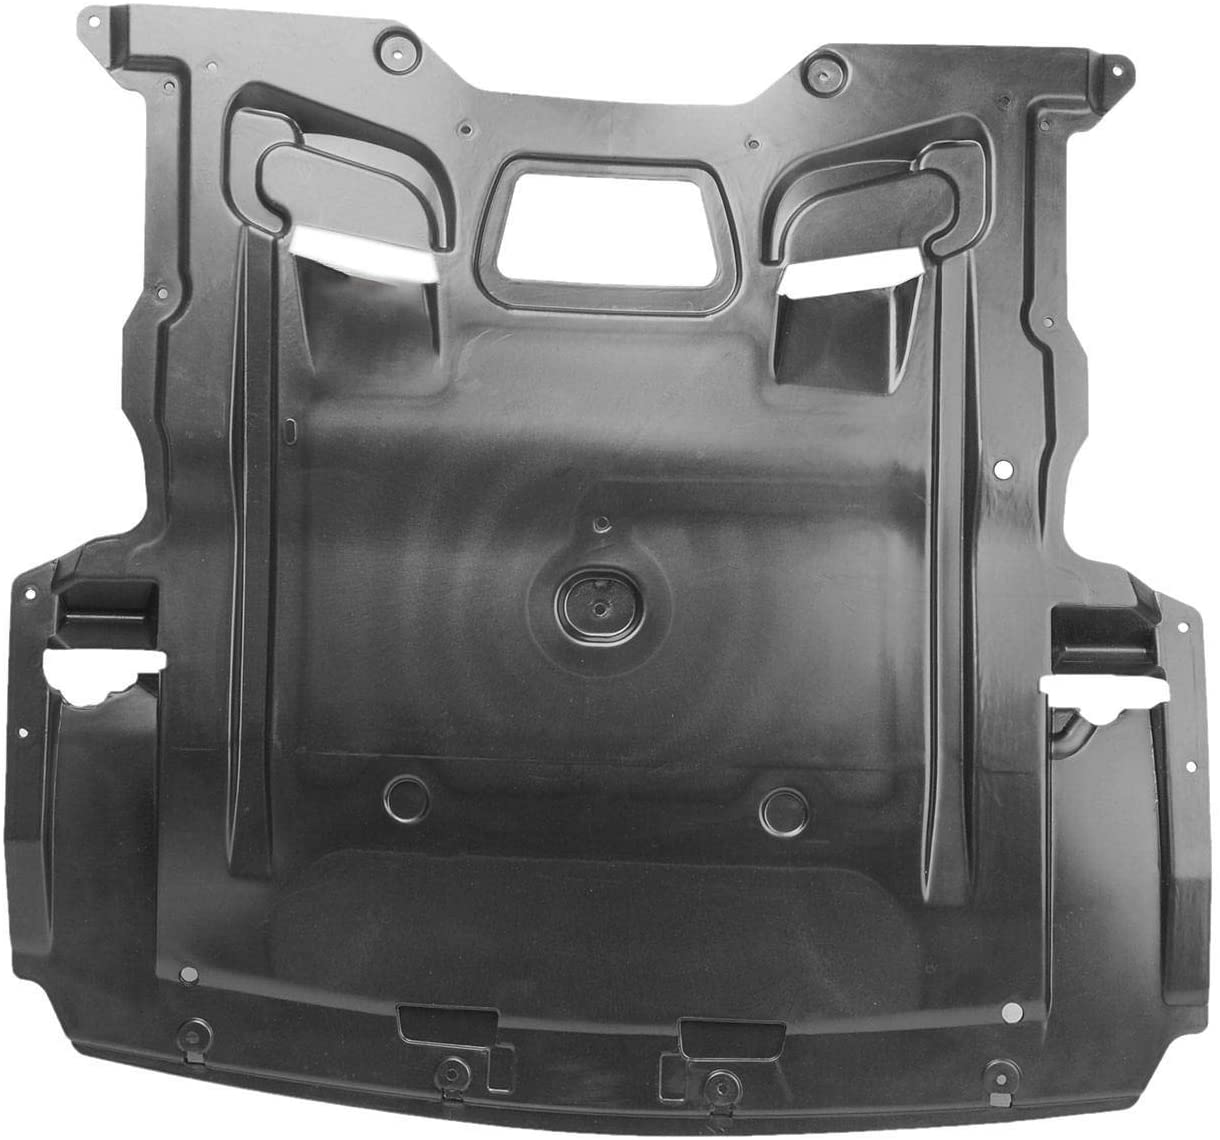 Aftermarket UNDER ENGINE COVERS for BMW - 640I, 640i,12-17,Lower engine cover